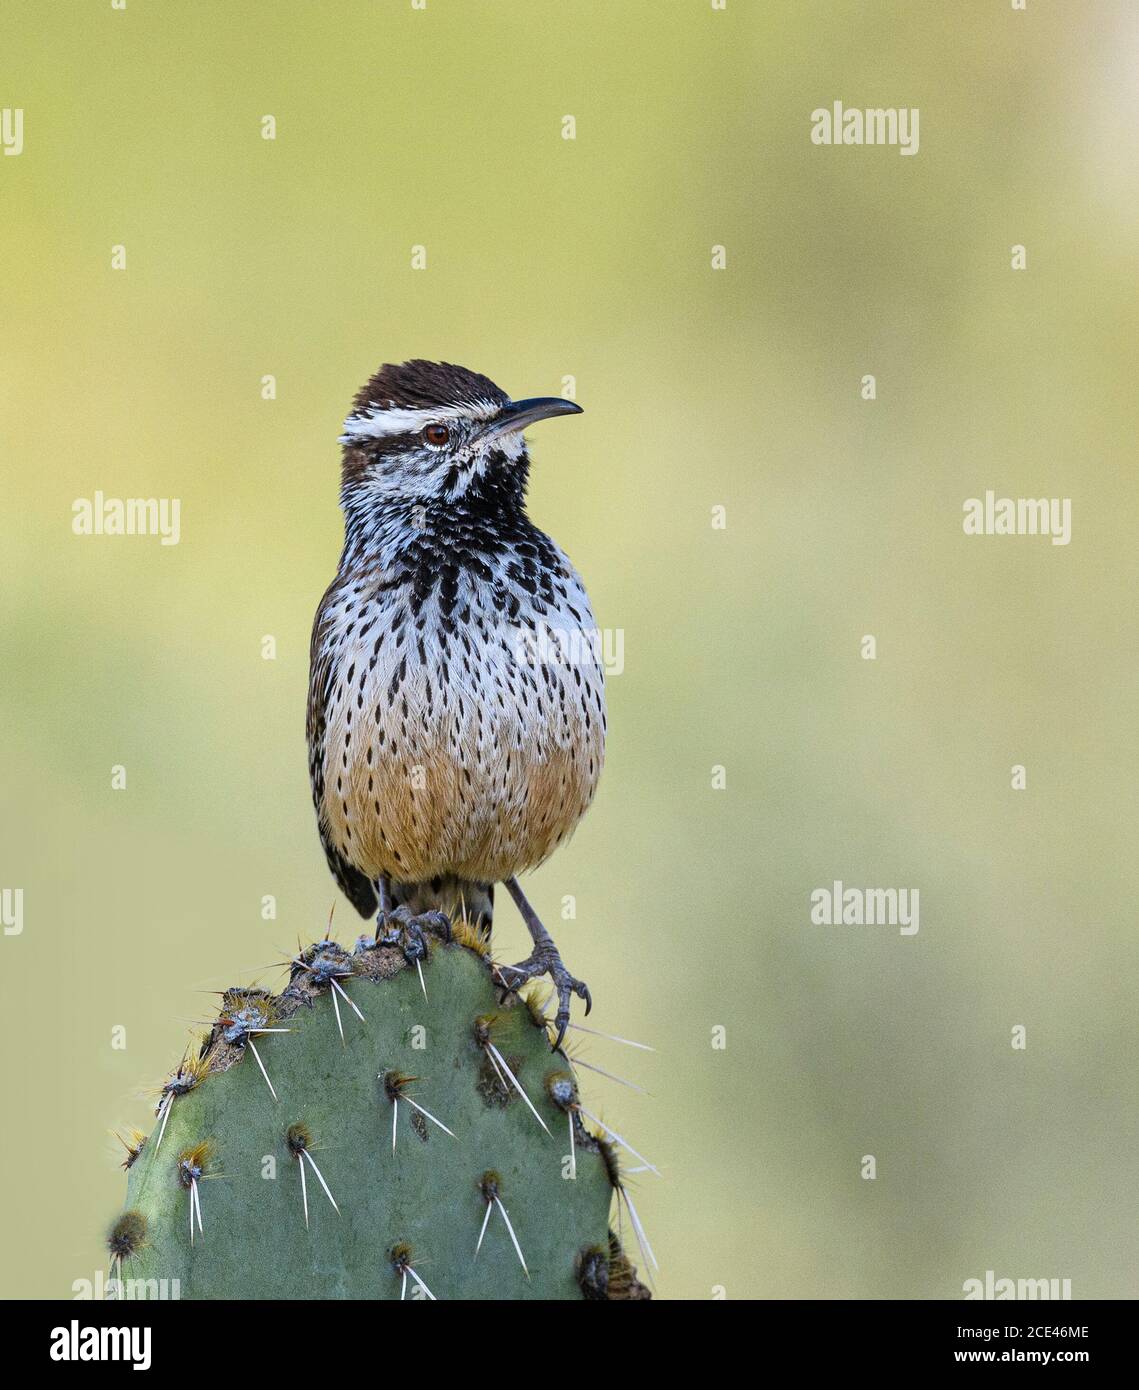 Cactus Wren perched on Prickly Pear Stock Photo